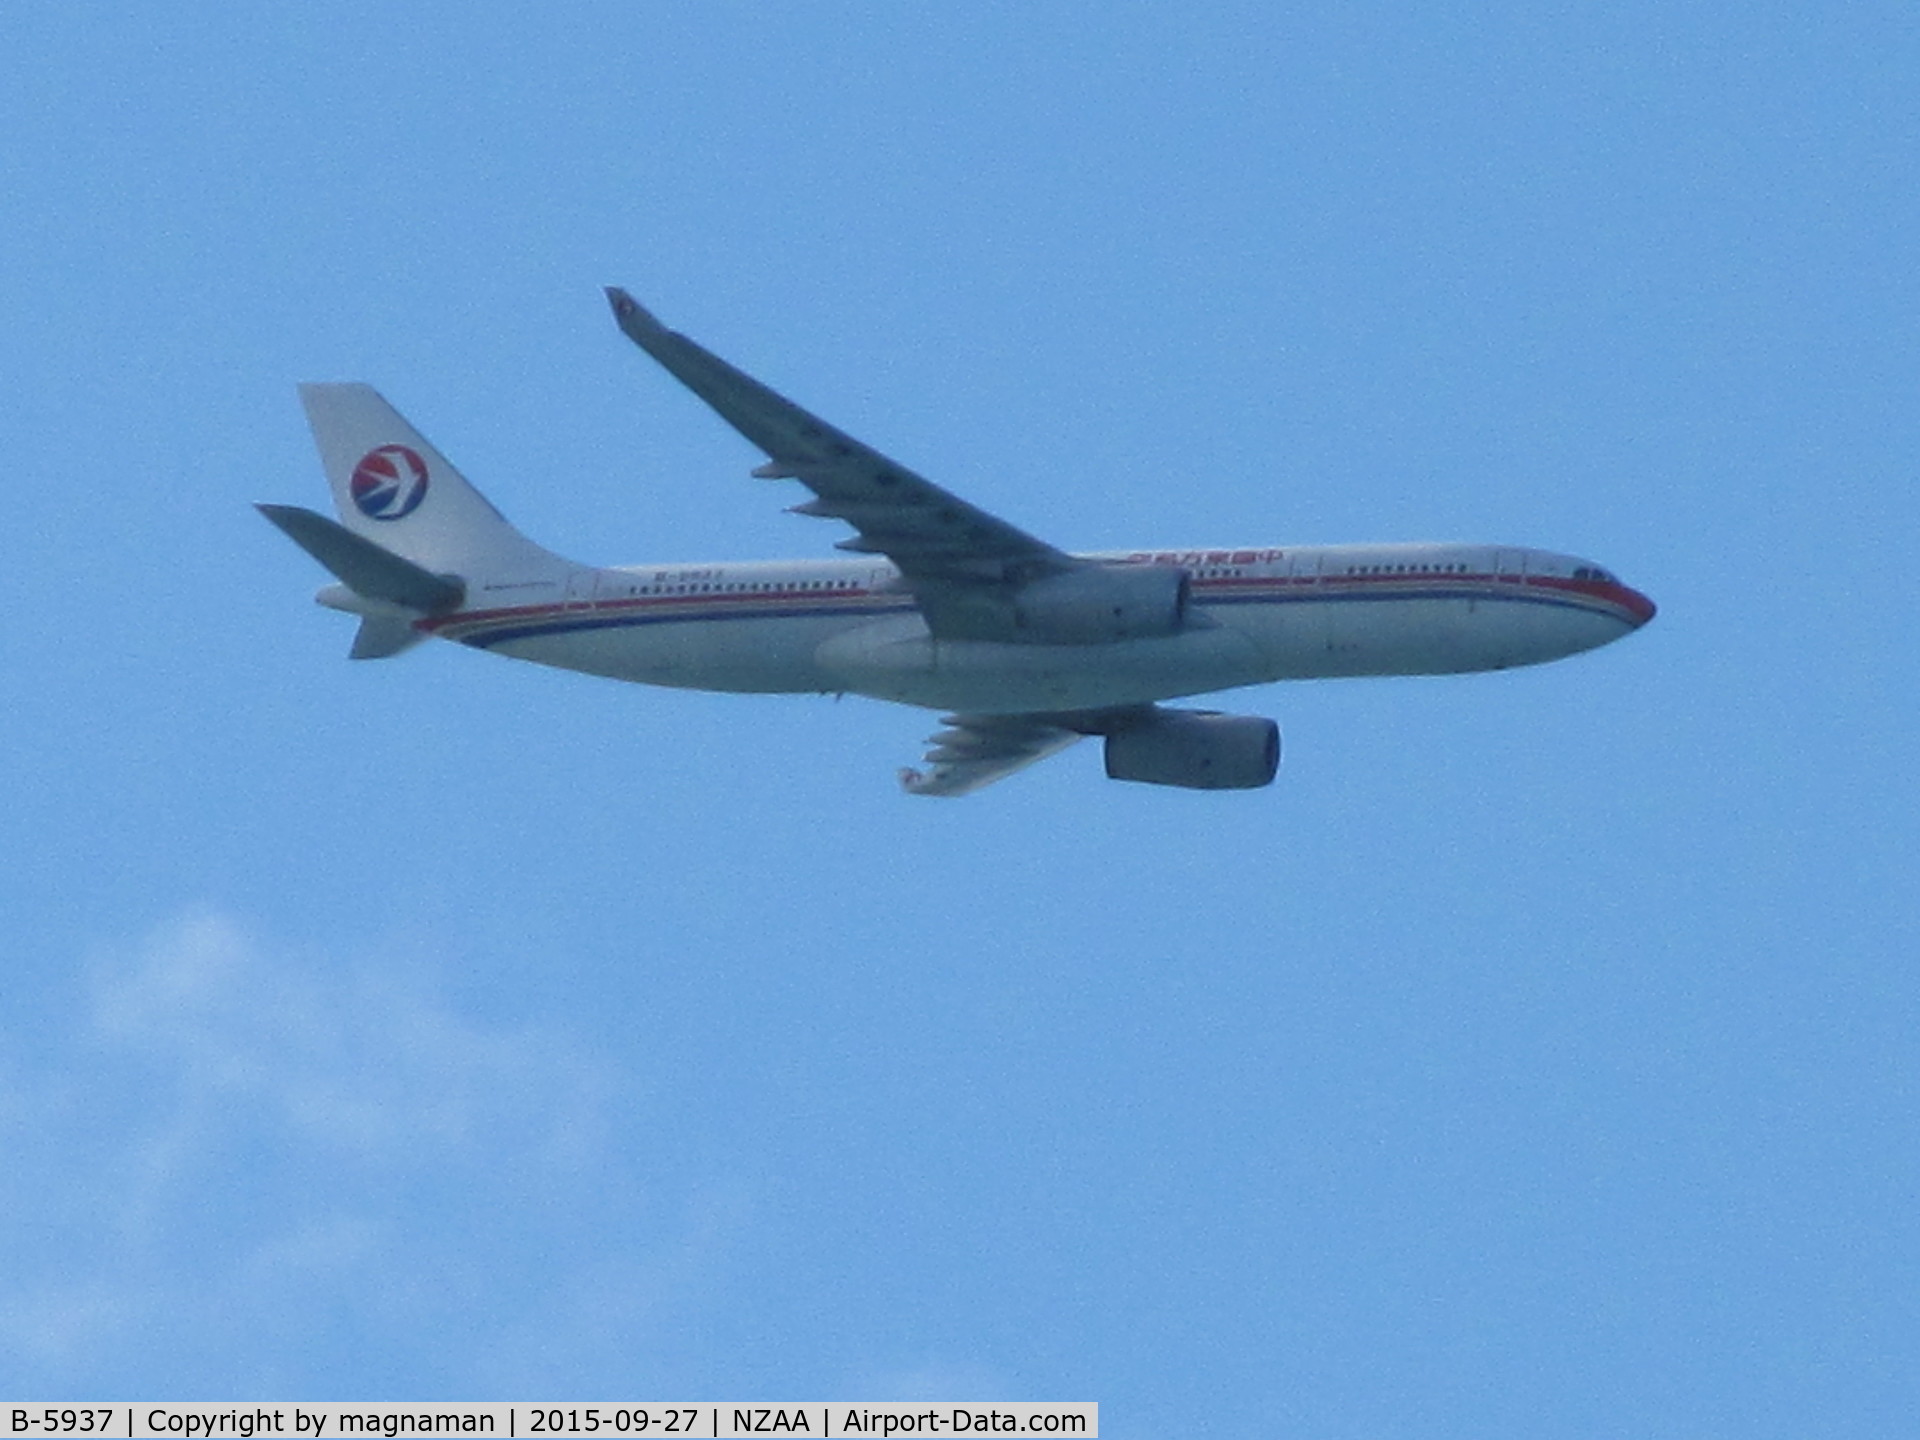 B-5937, 2013 Airbus A330-243 C/N 1468, Long zoom shot - Flying over back garden just now on way into AKL